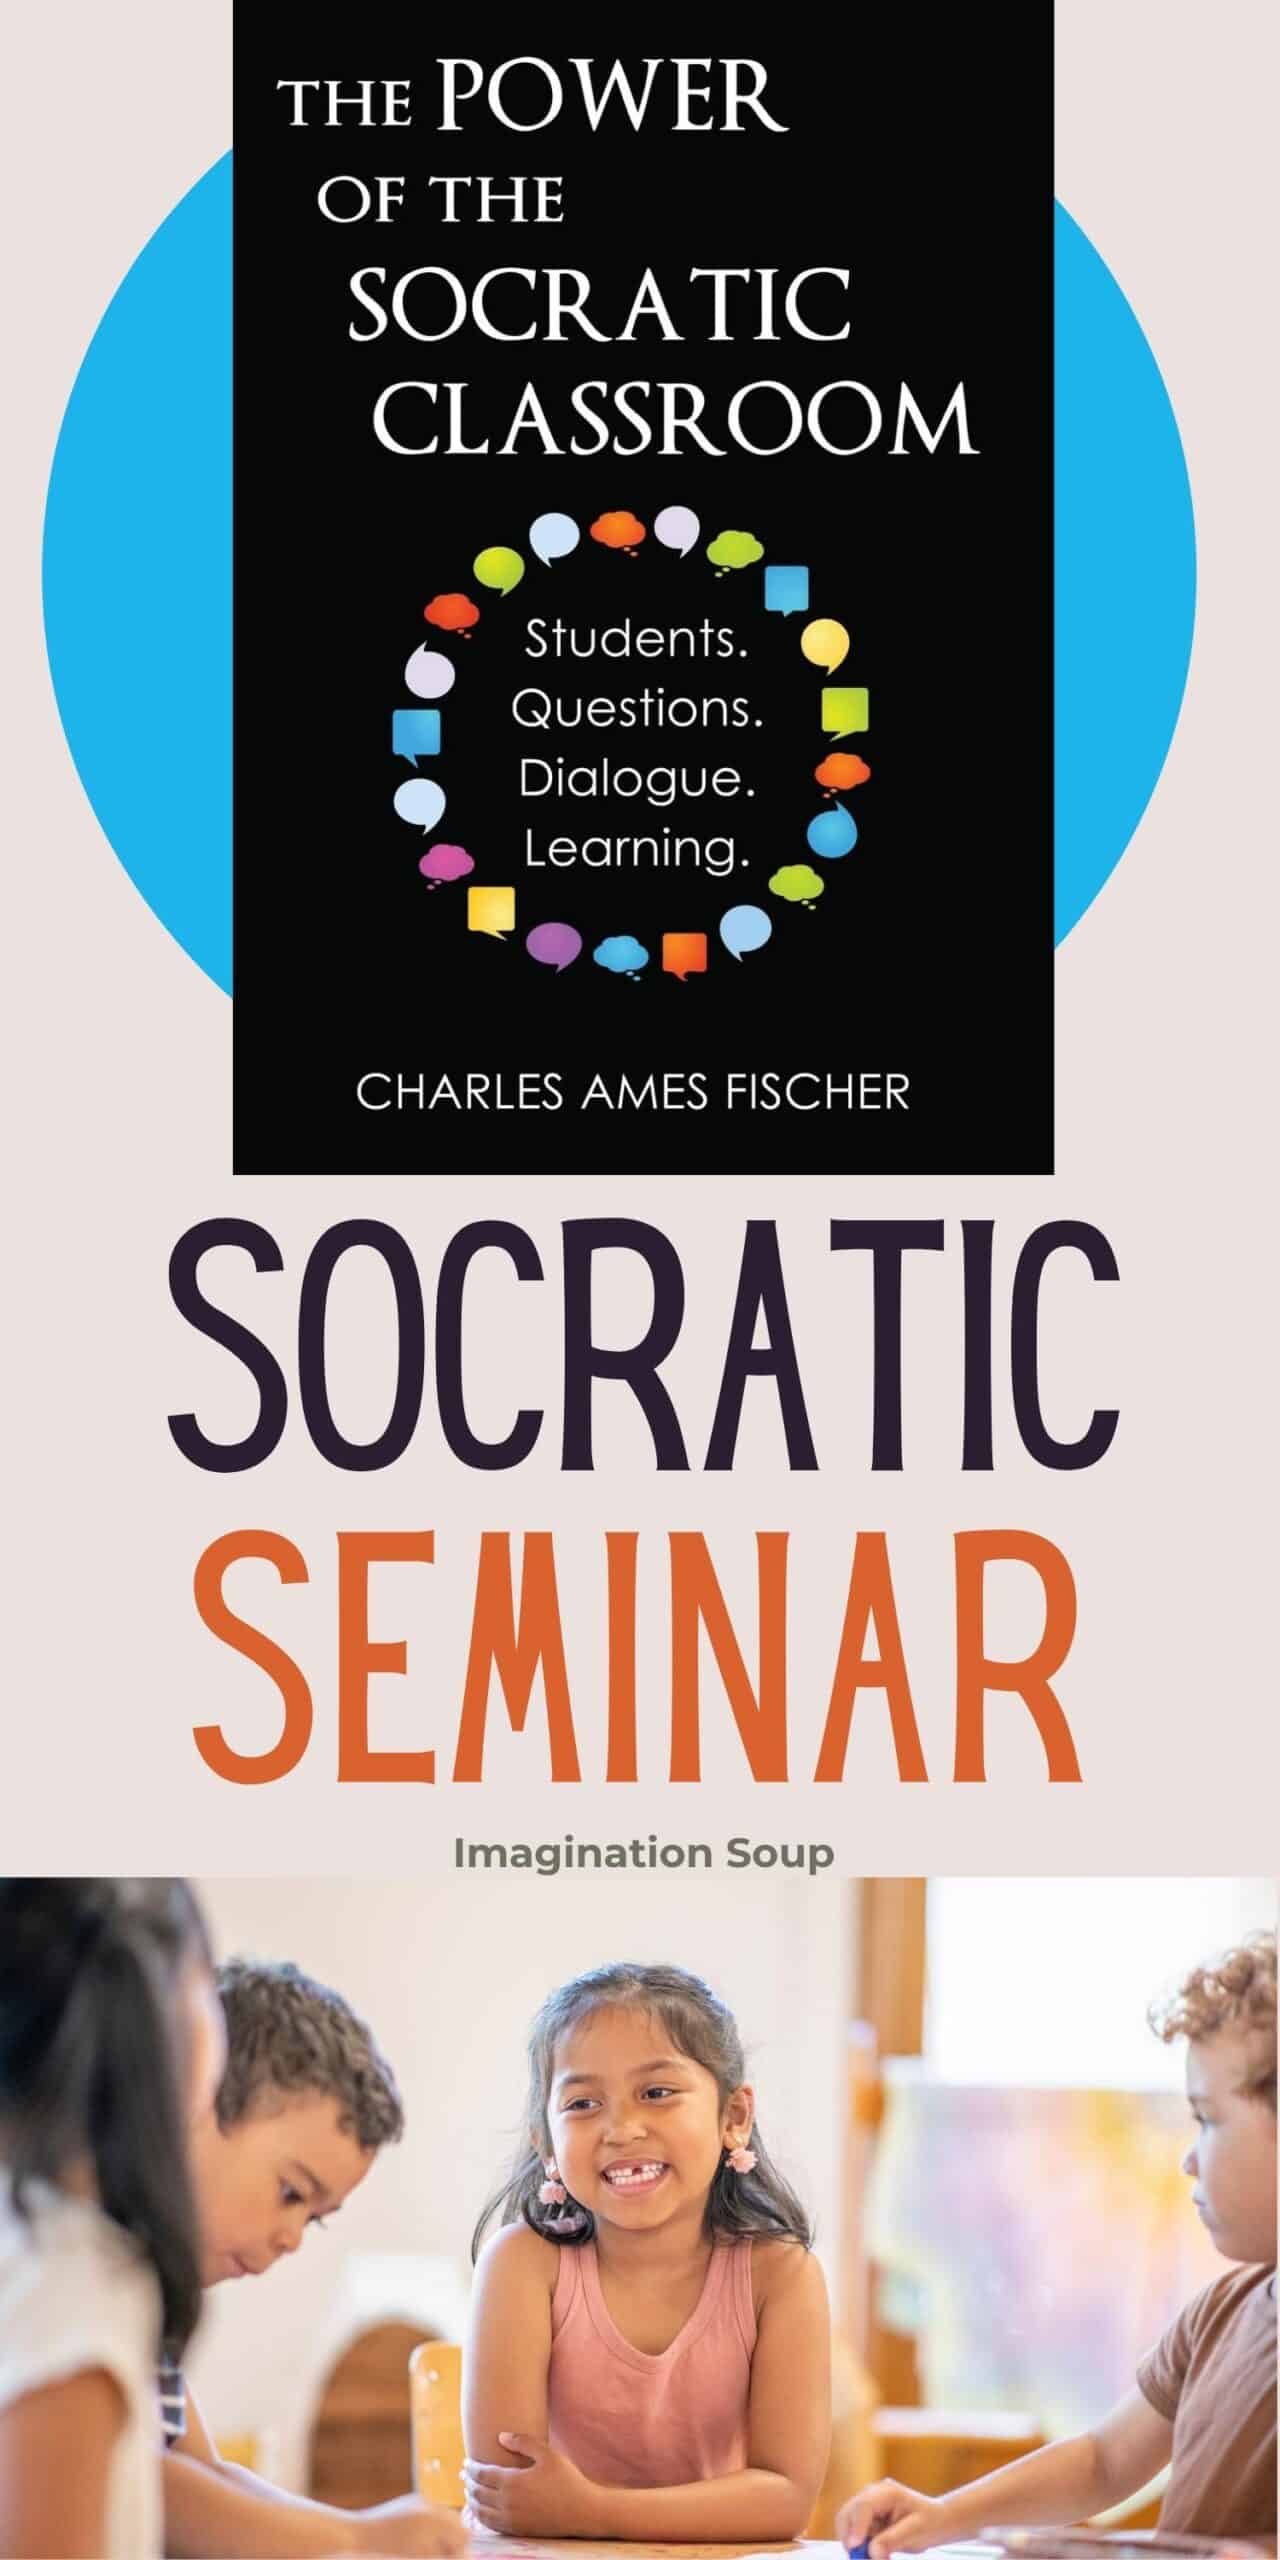 Learn about Socratic Seminar